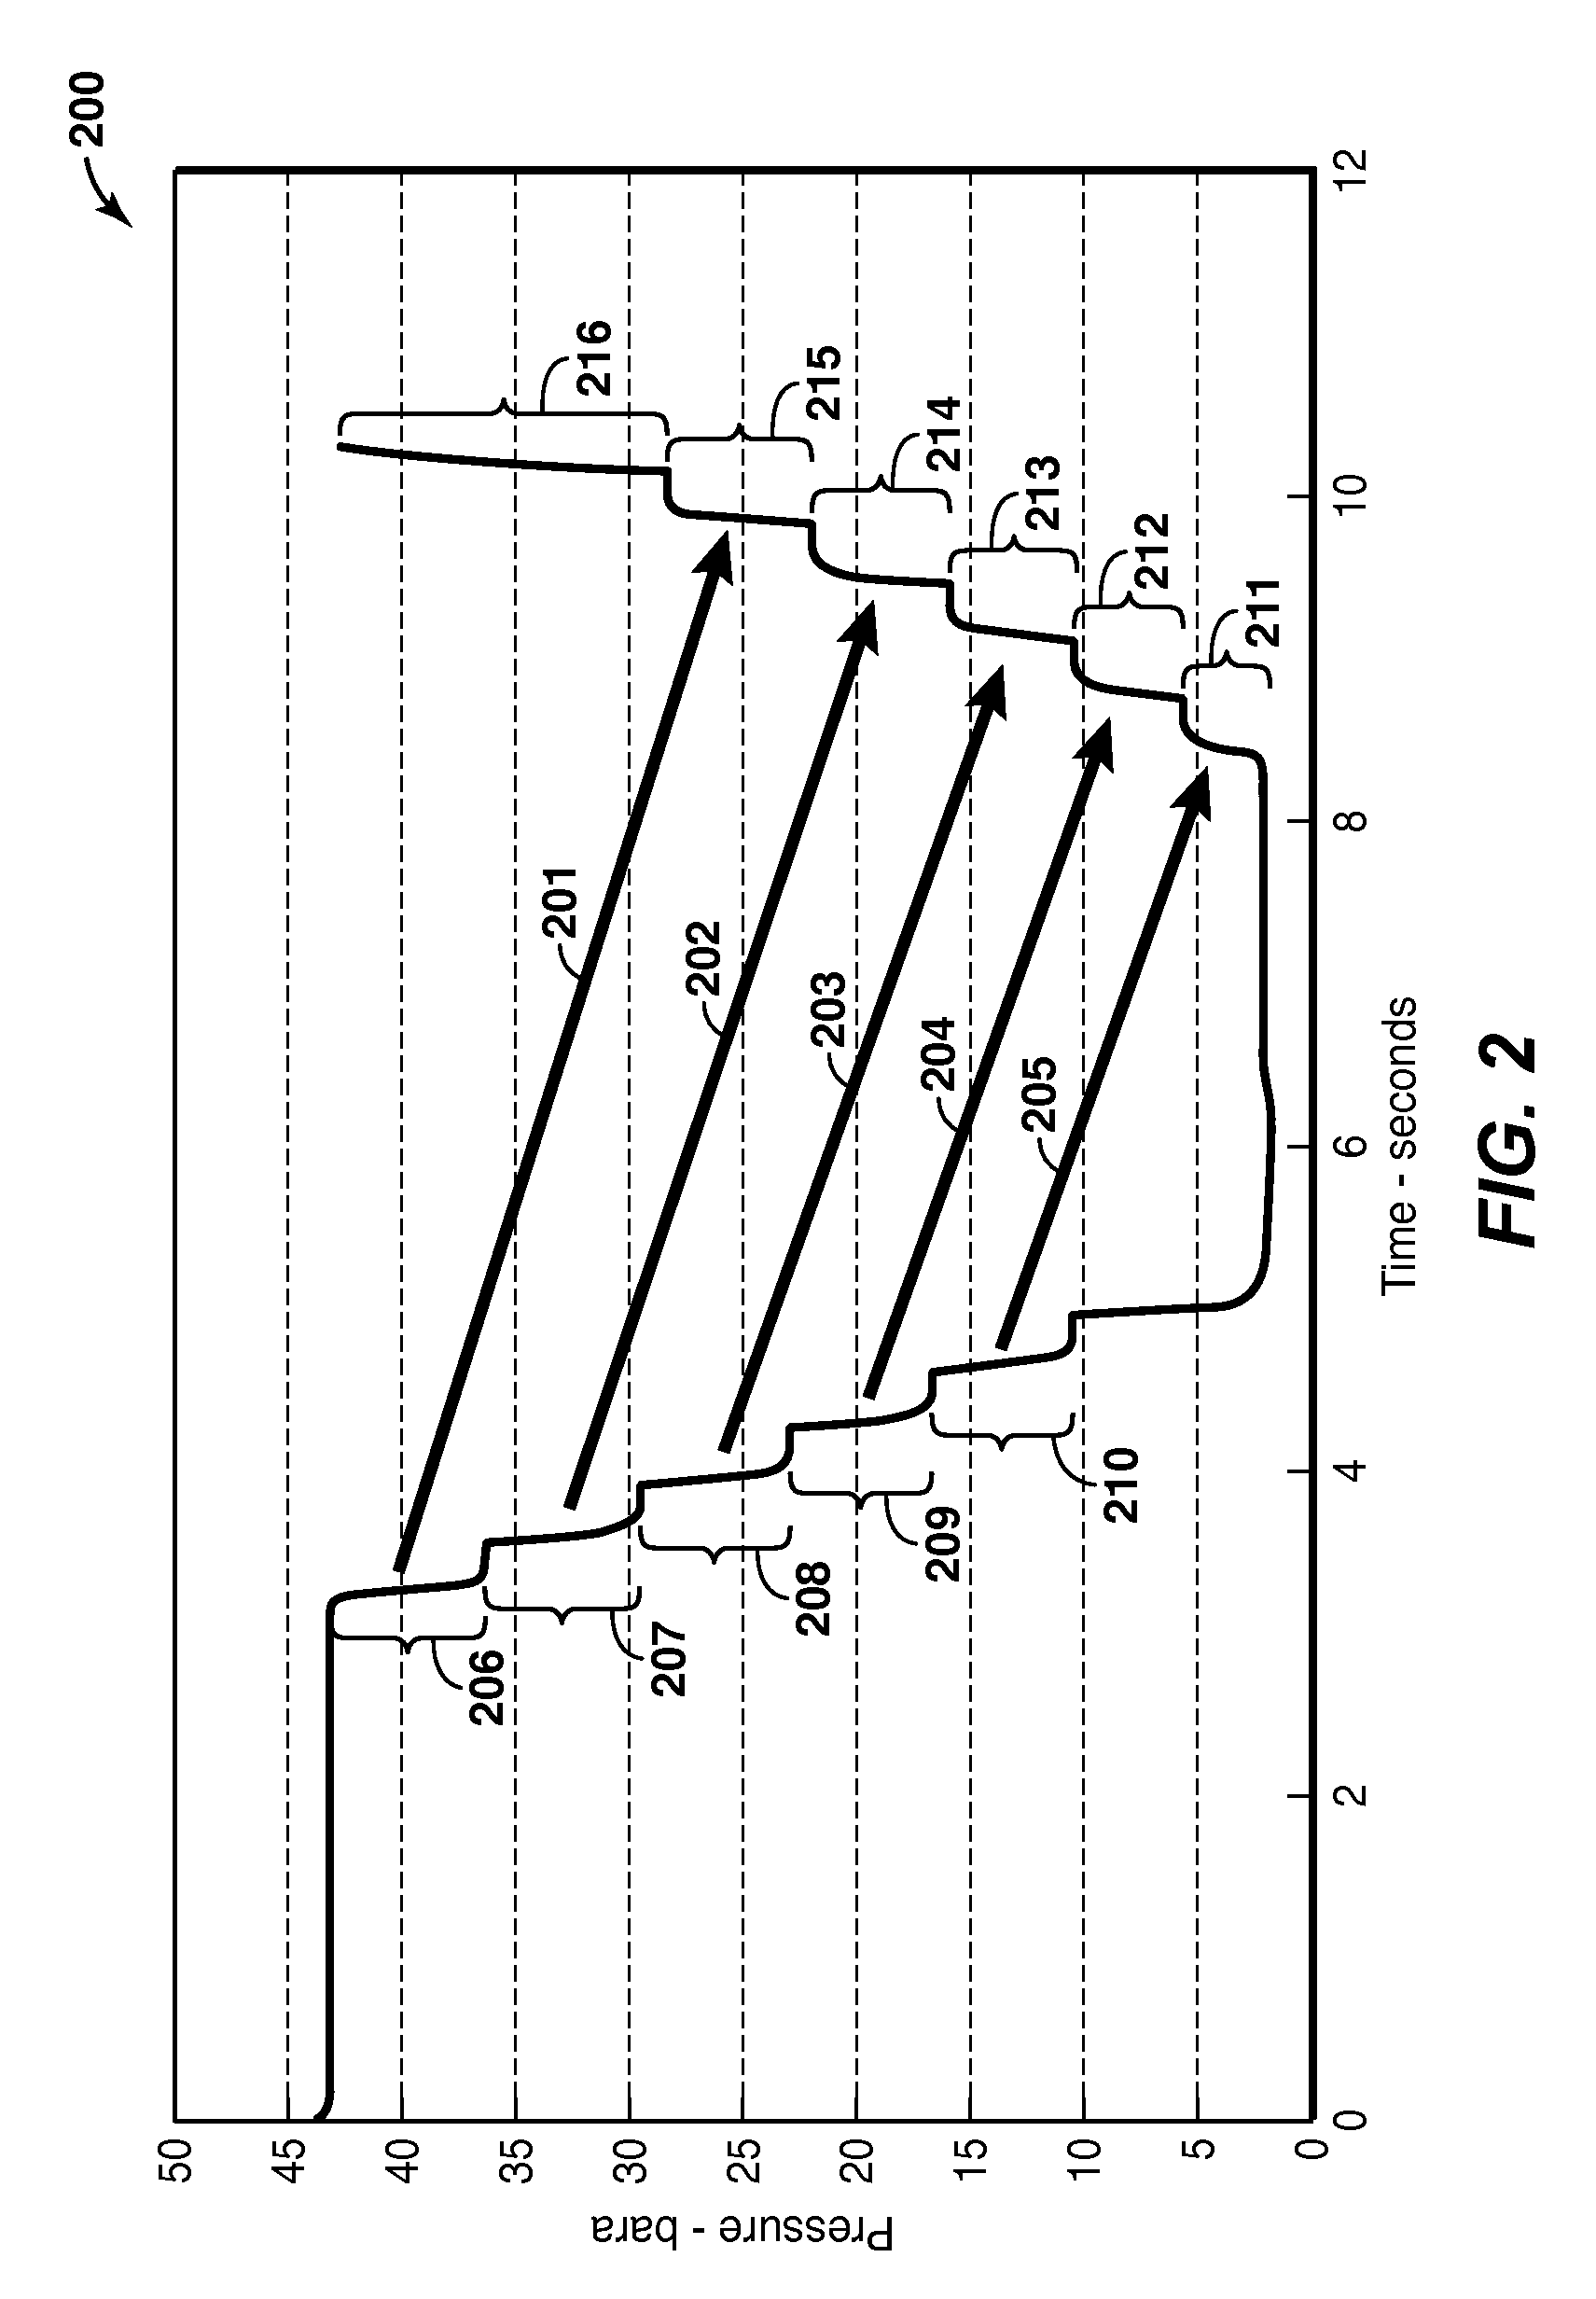 Methods of removing contaminants from a hydrocarbon stream by swing adsorption and related apparatus and systems